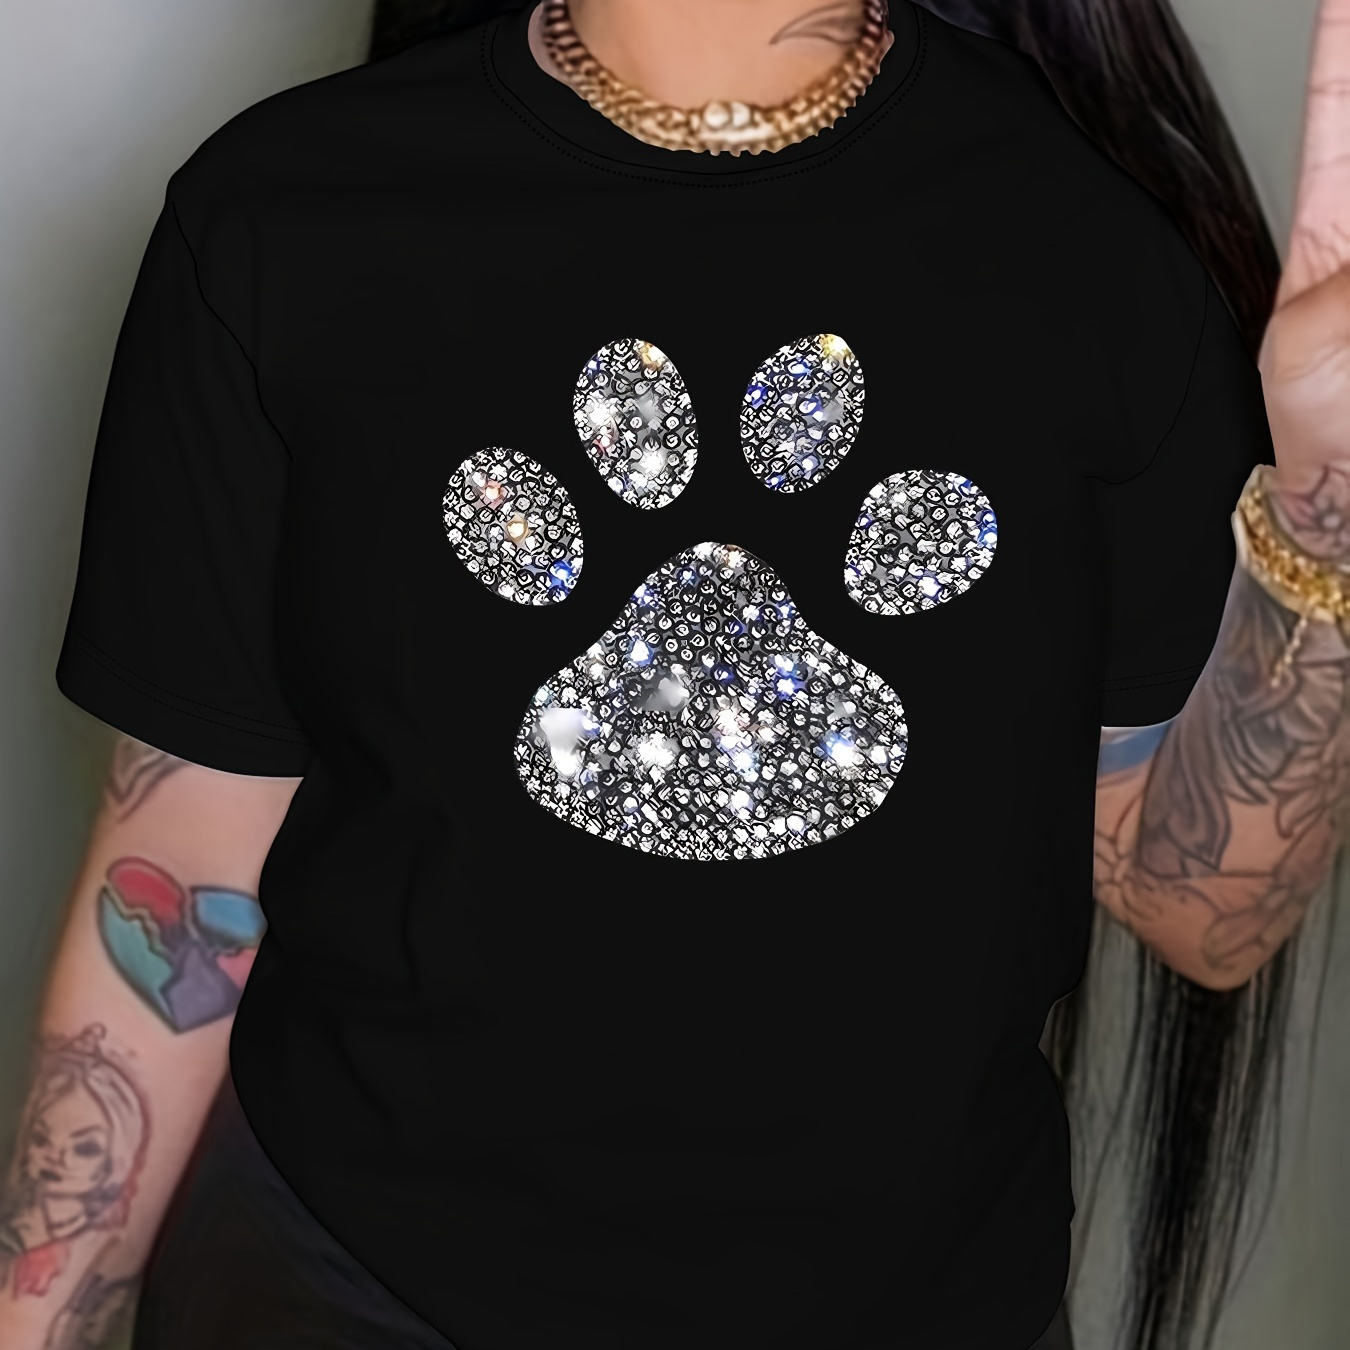 

Paw Pattern Crew Neck T-shirt, Casual Short Sleeve T-shirt For Spring & Summer, Women's Clothing